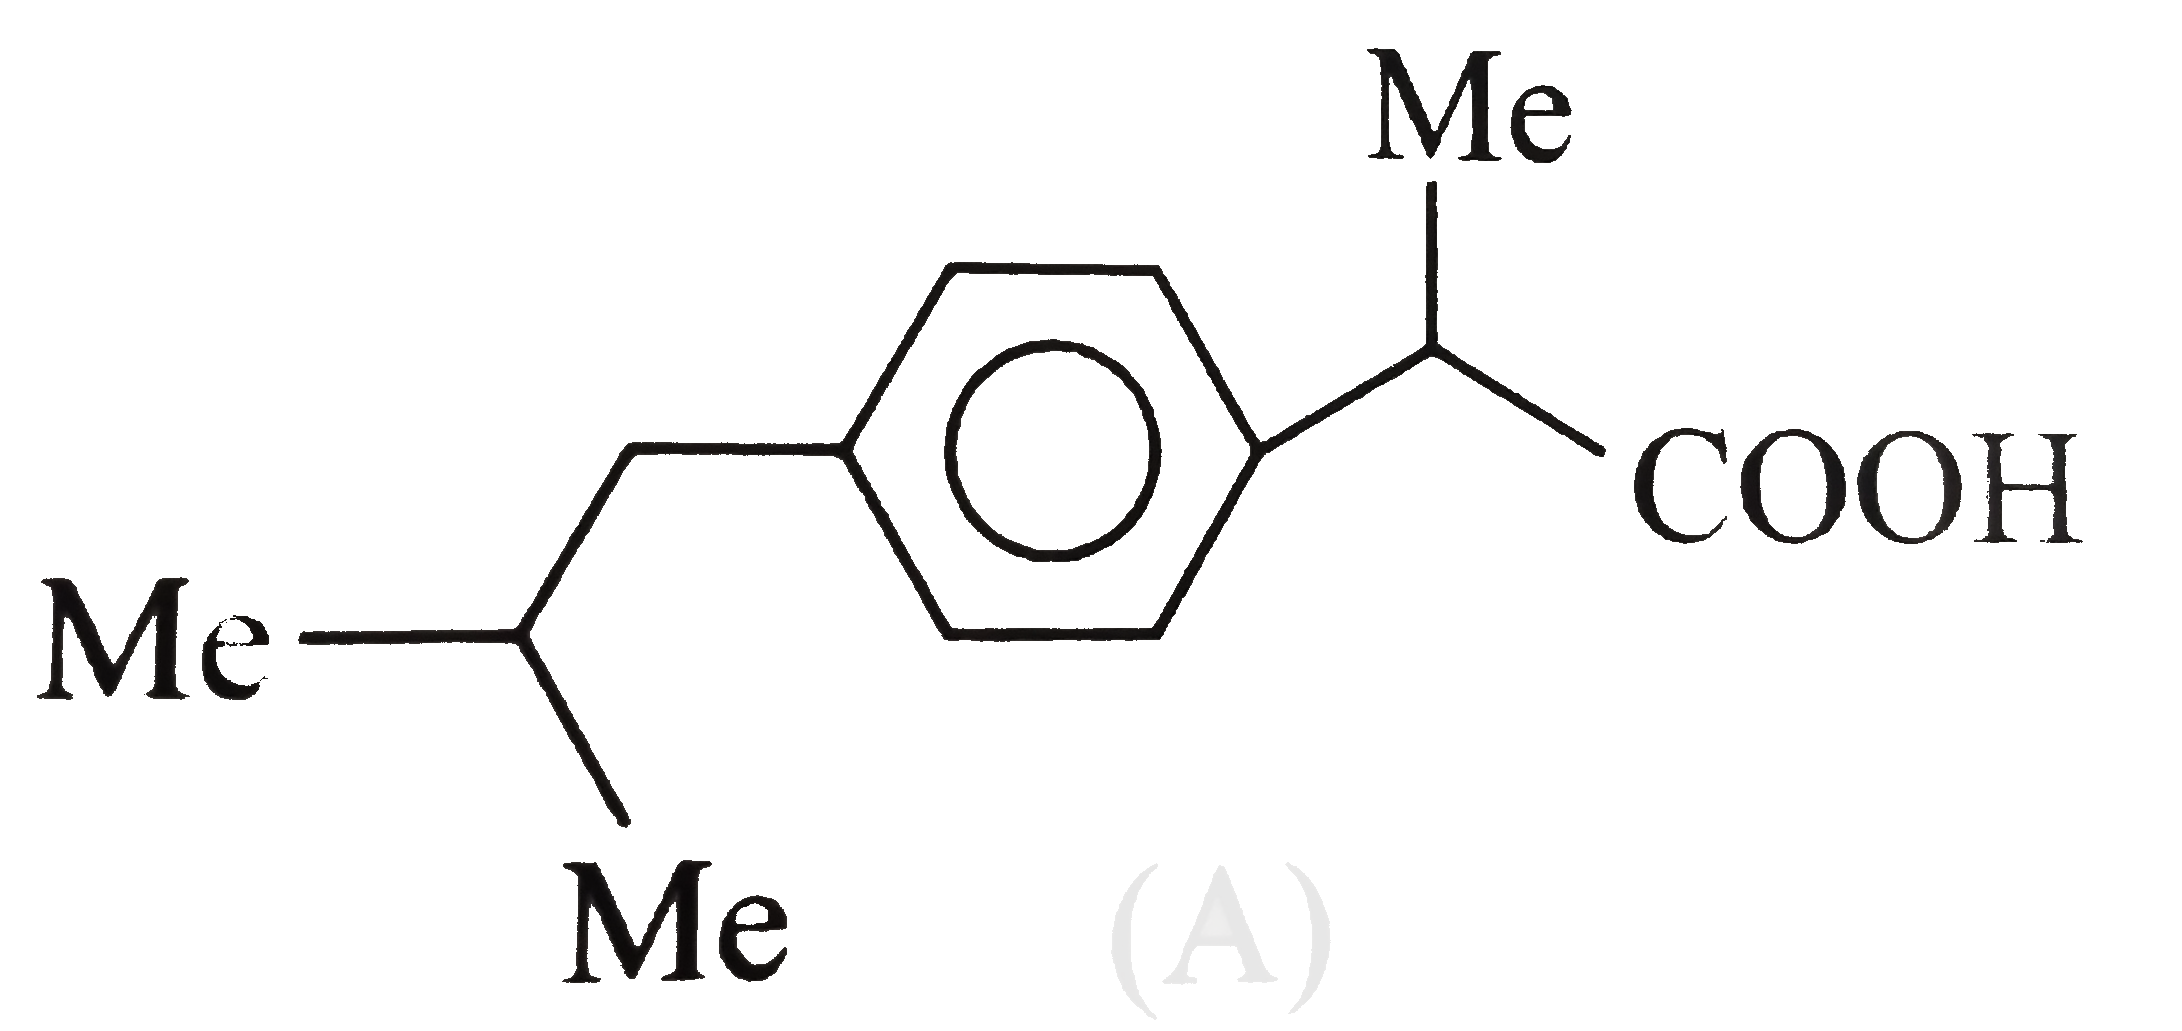 The analgesic drug ibuprofen (A) is chiral and exists in (+) and (-) froms. One enantiomer is physiologically active, while the other is inactive. The other is inactive. The structure of ibuprofen is given below.      The number of pi - bonds in (A) is :